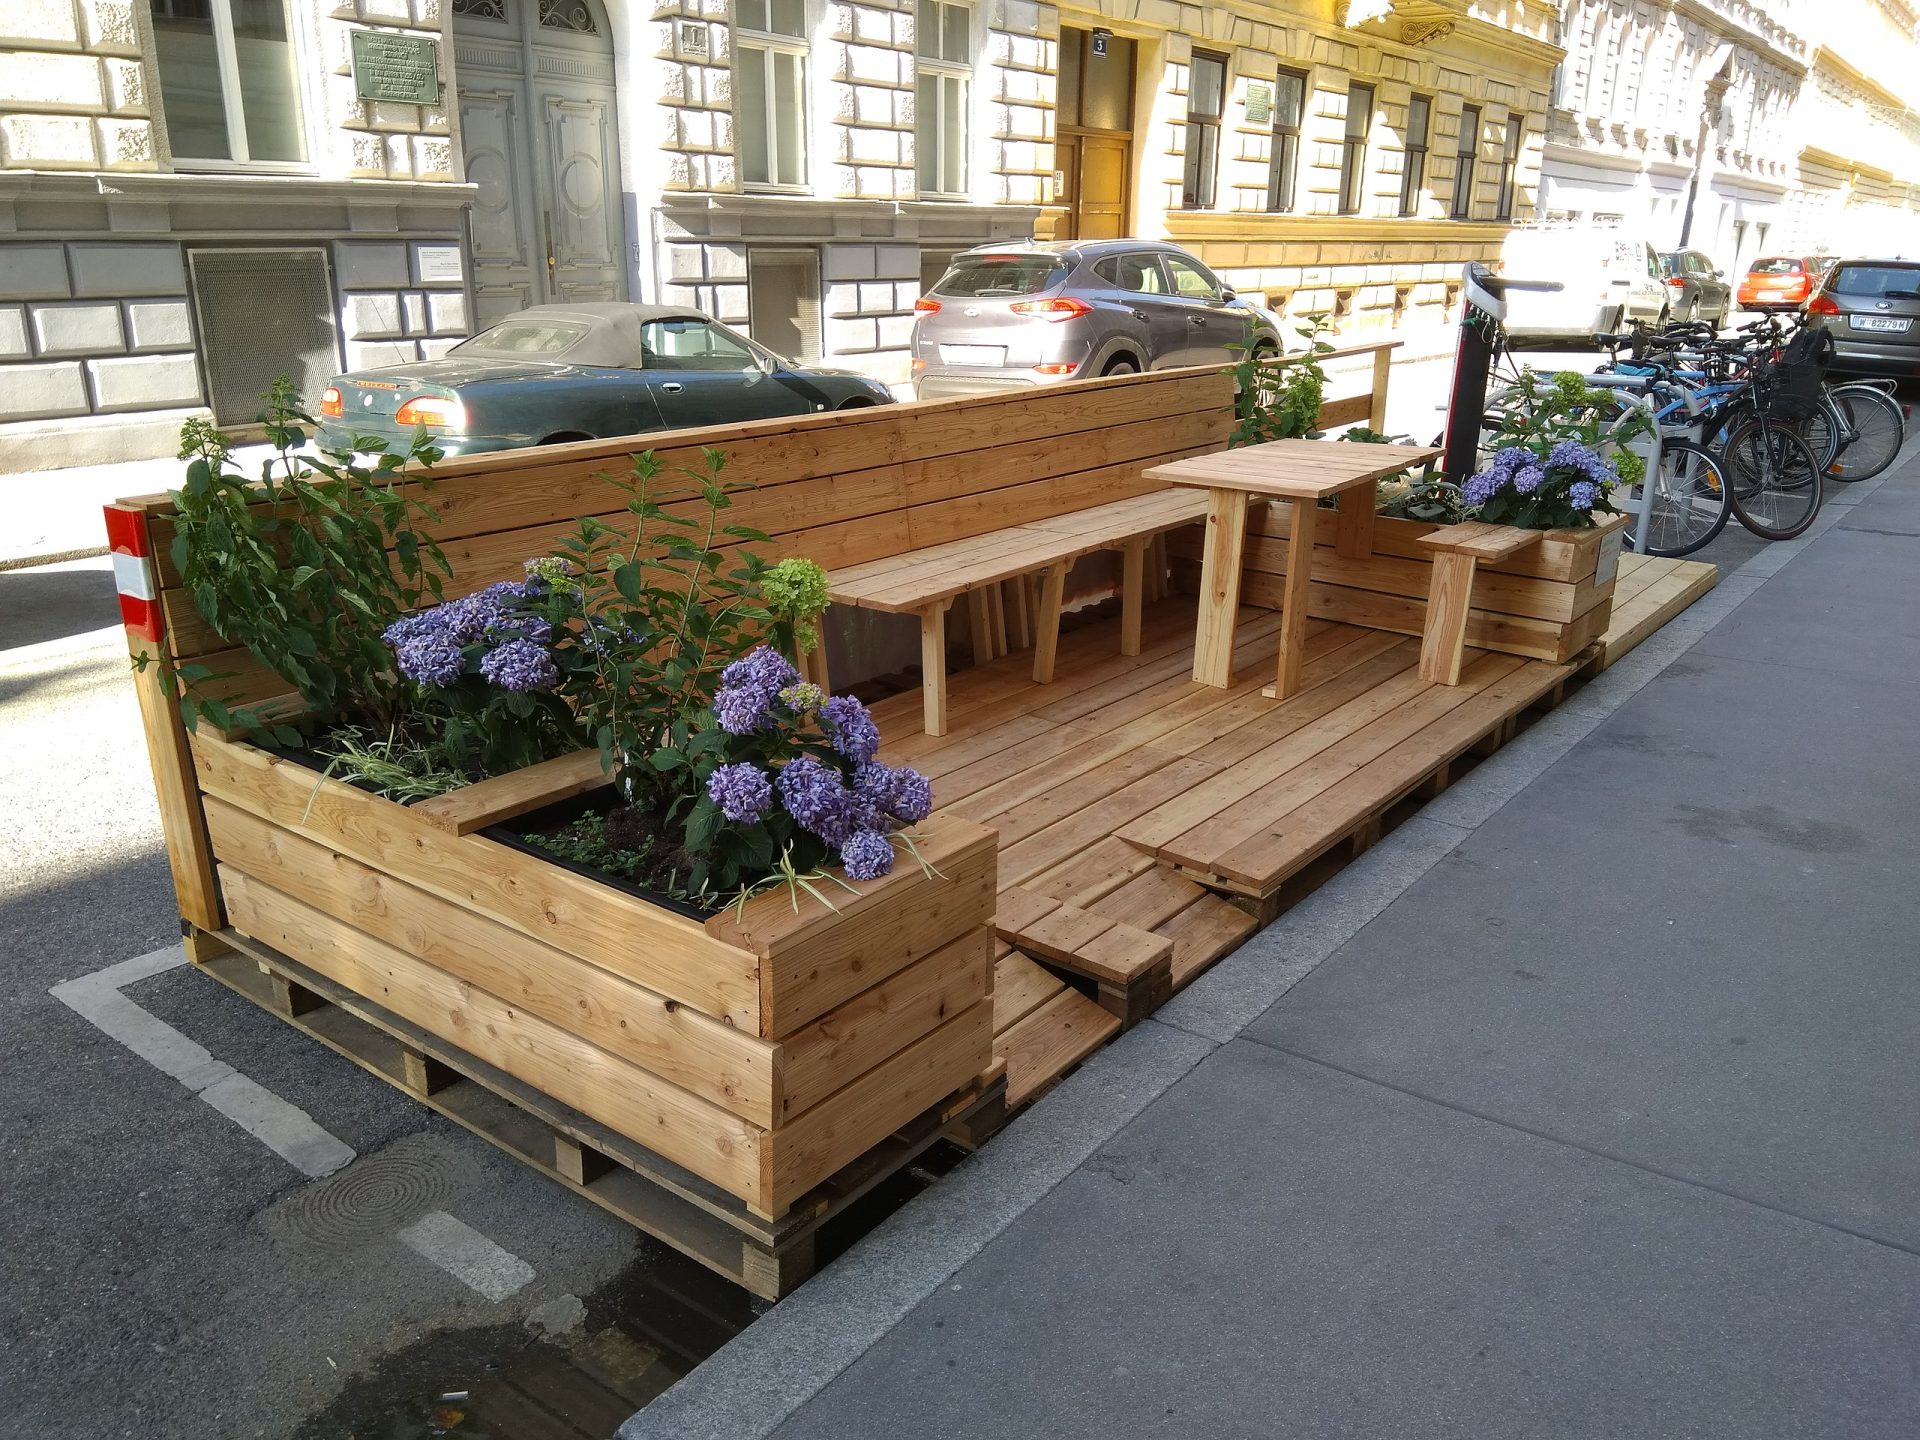 How to build a parklet for a single parking space that Will engage with neighbors, build community and green your urban neighborhood.